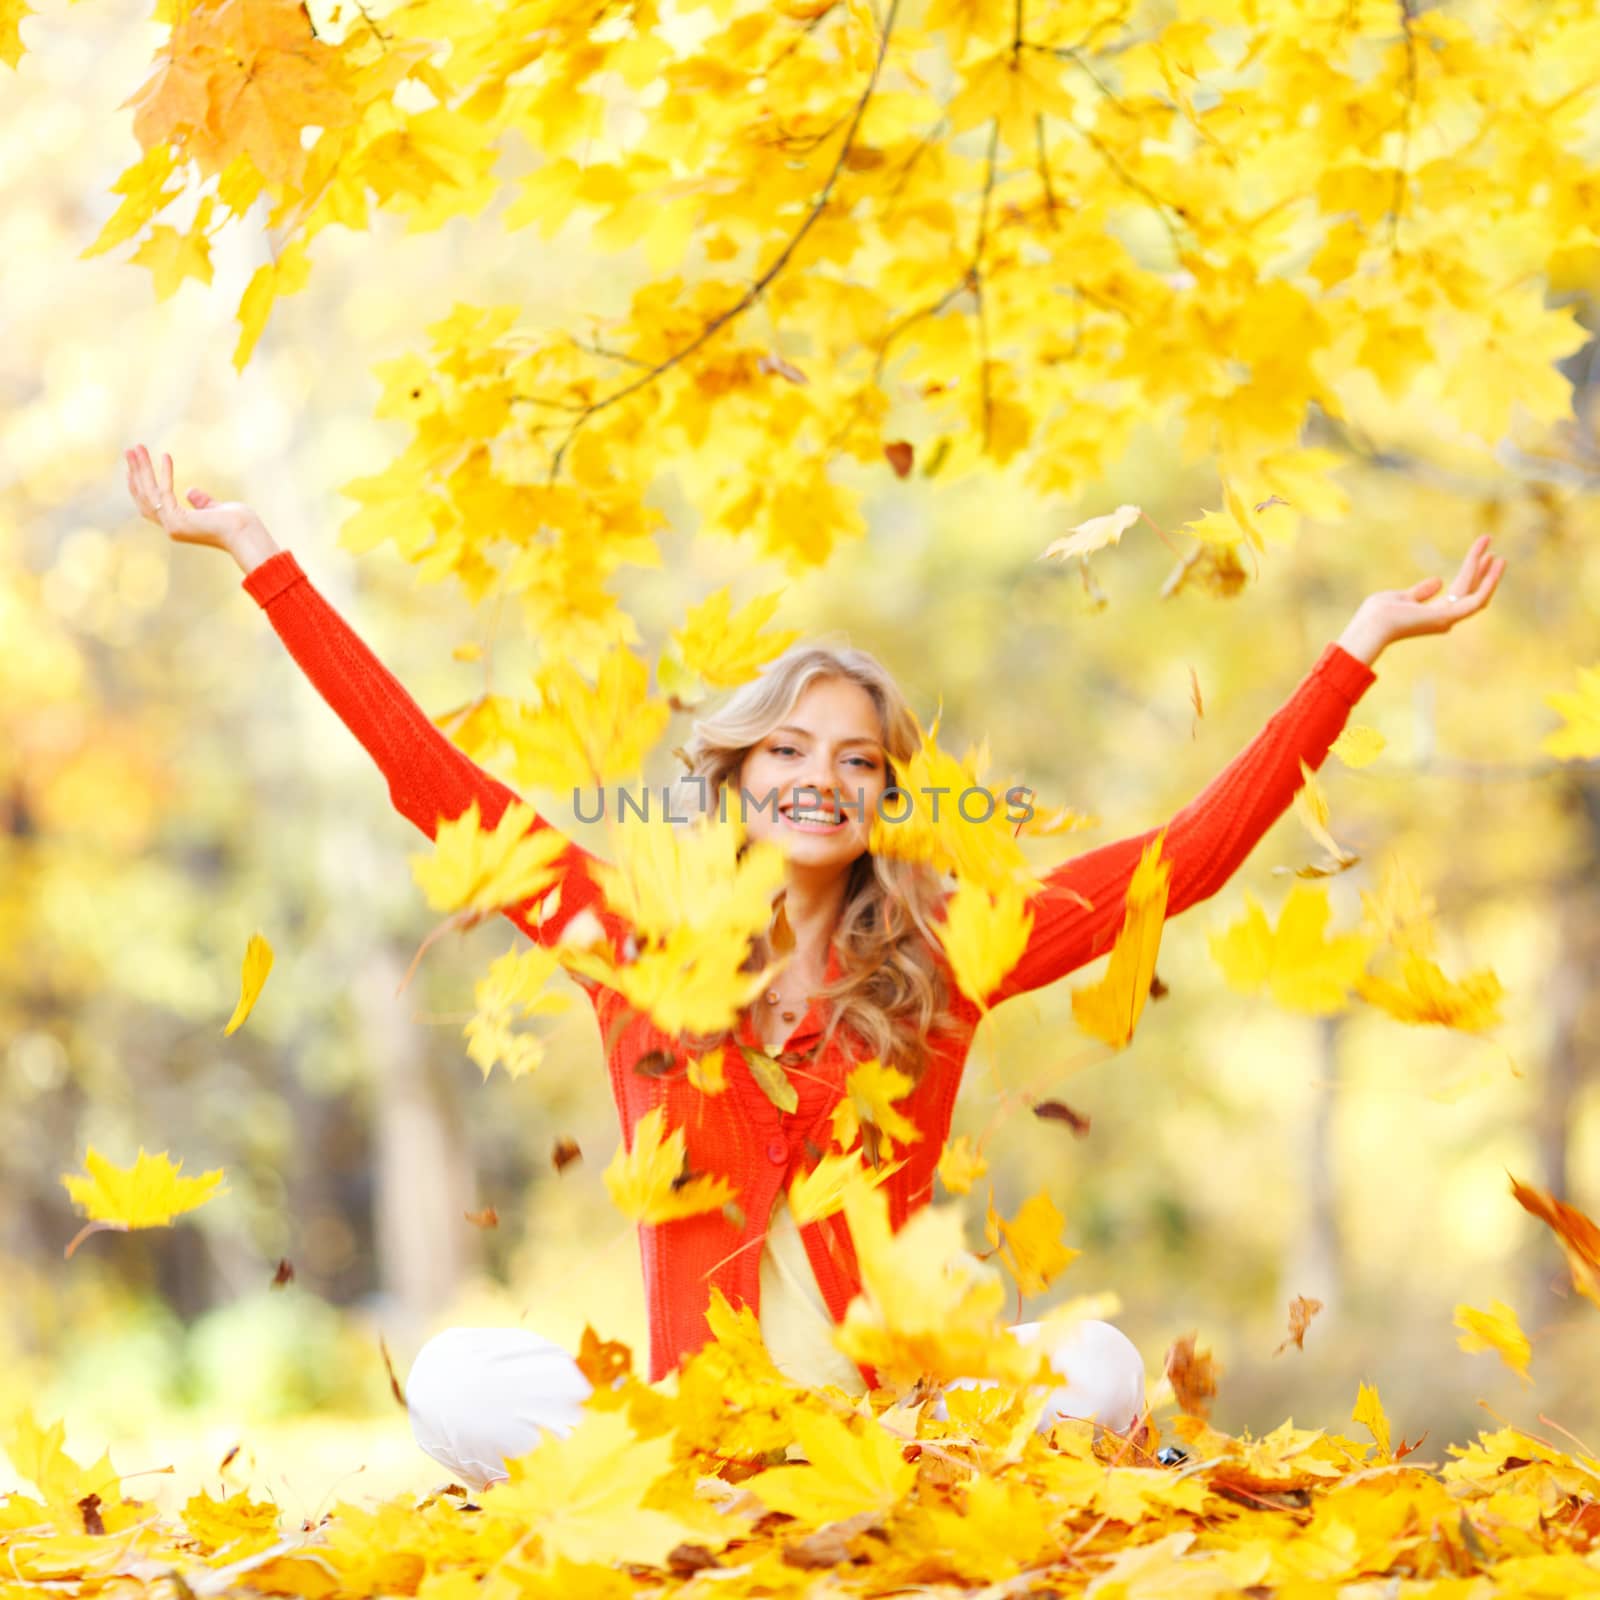 Woman throwing autumn leaves  by Yellowj